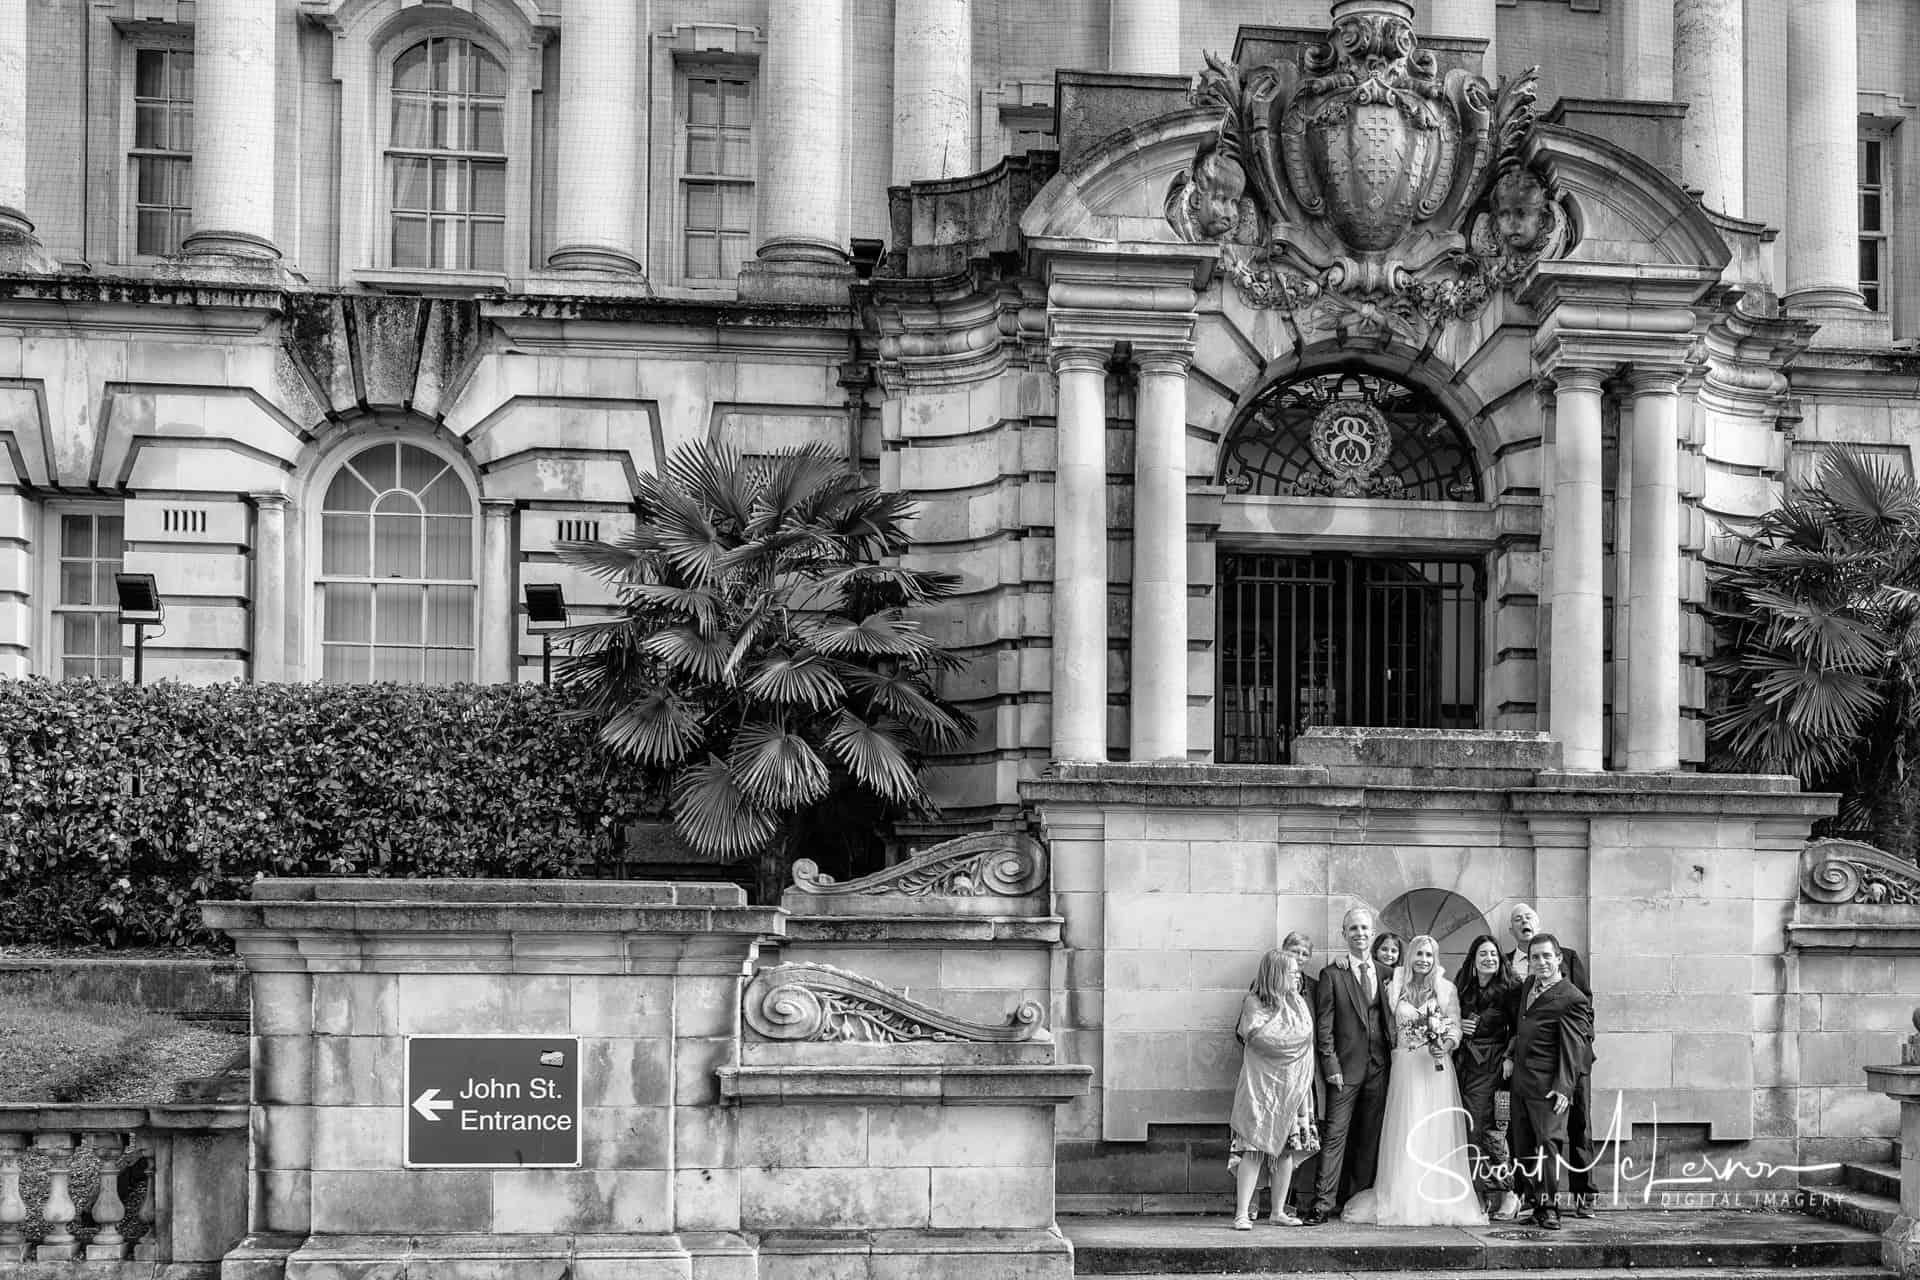 Stockport Town Hall Wedding Photography by Stuart McLernon